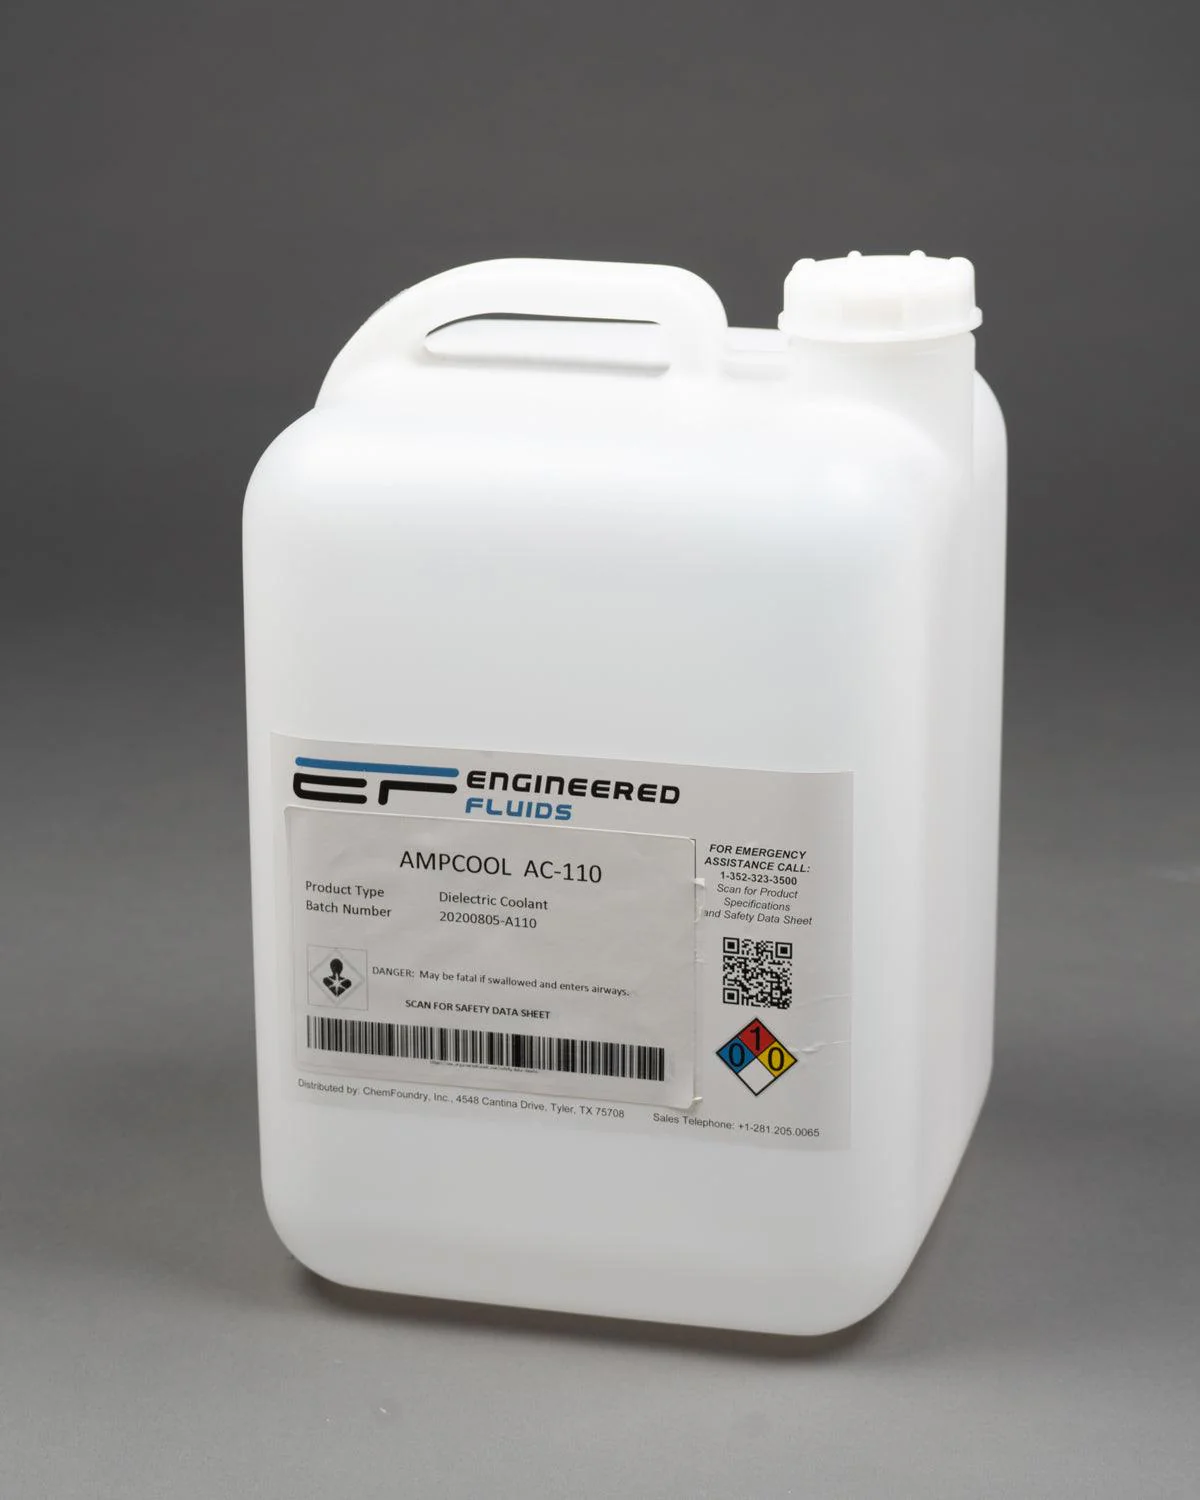 What's the lifespan and functional duration of AmpCool® AC-110 Dielectric Coolant?